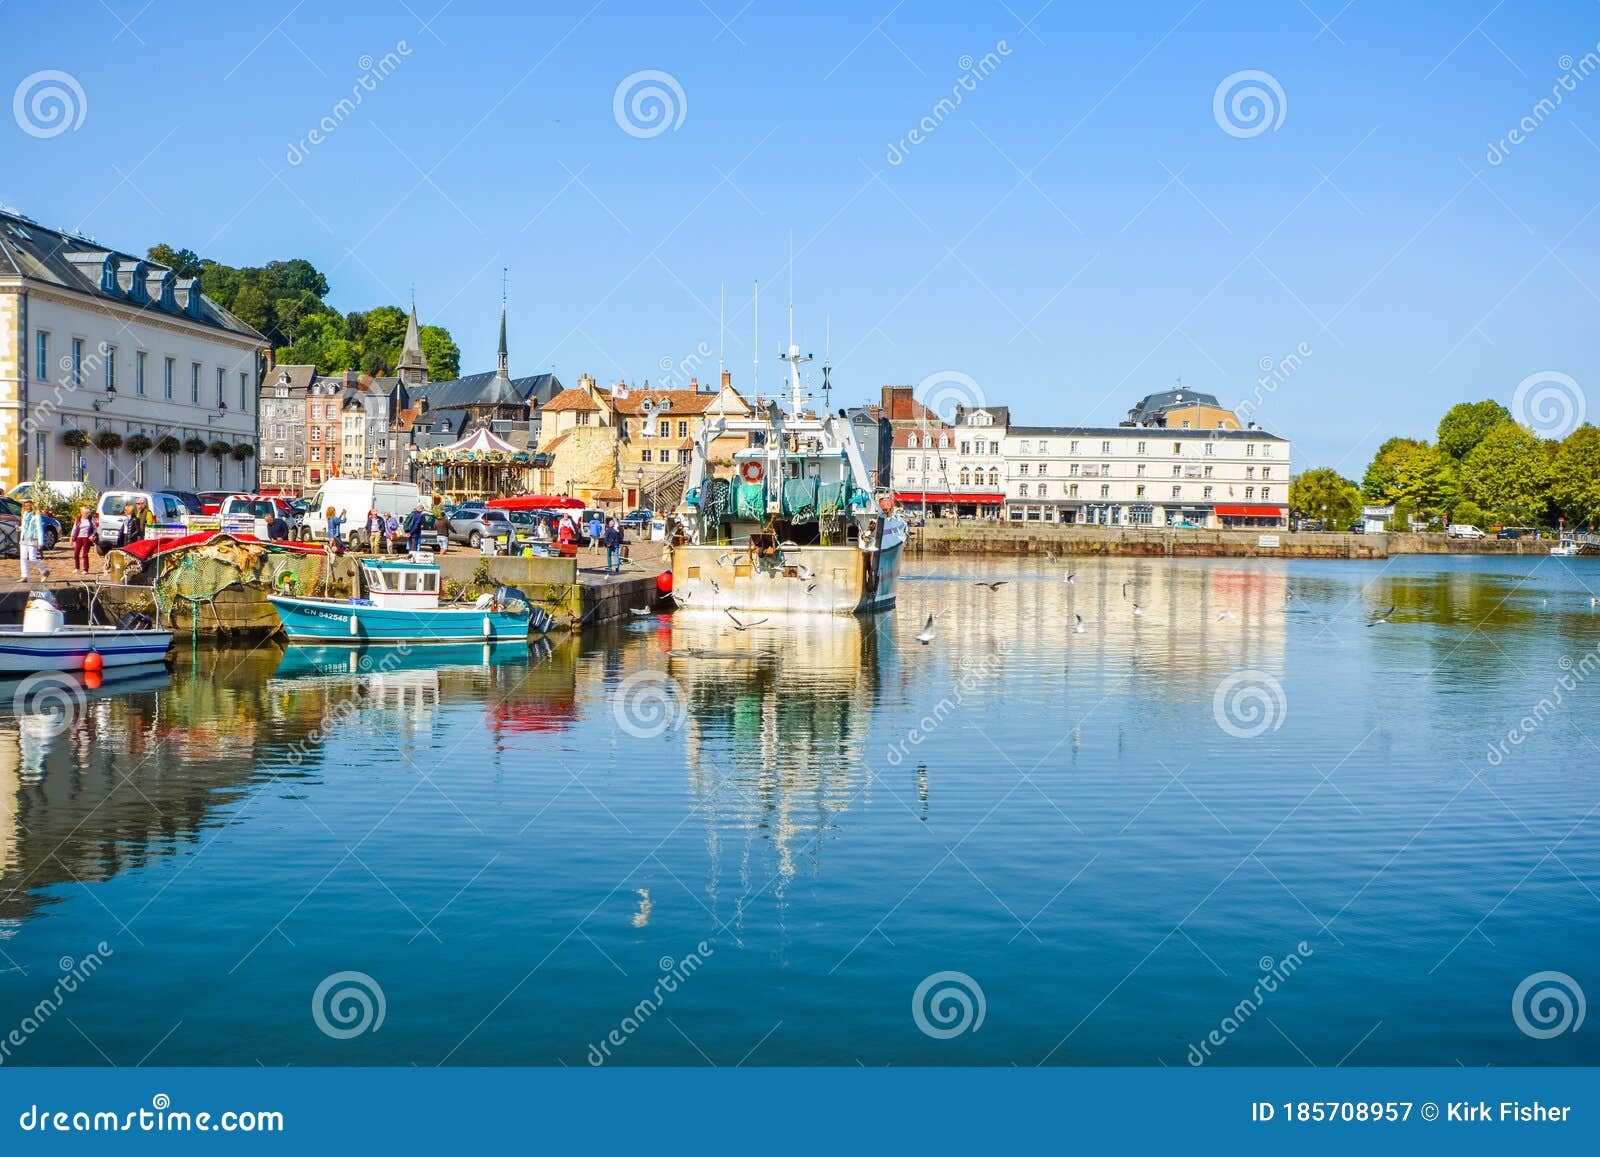 The Picturesque Port Harbour at Honfleur France, on the Coast of ...